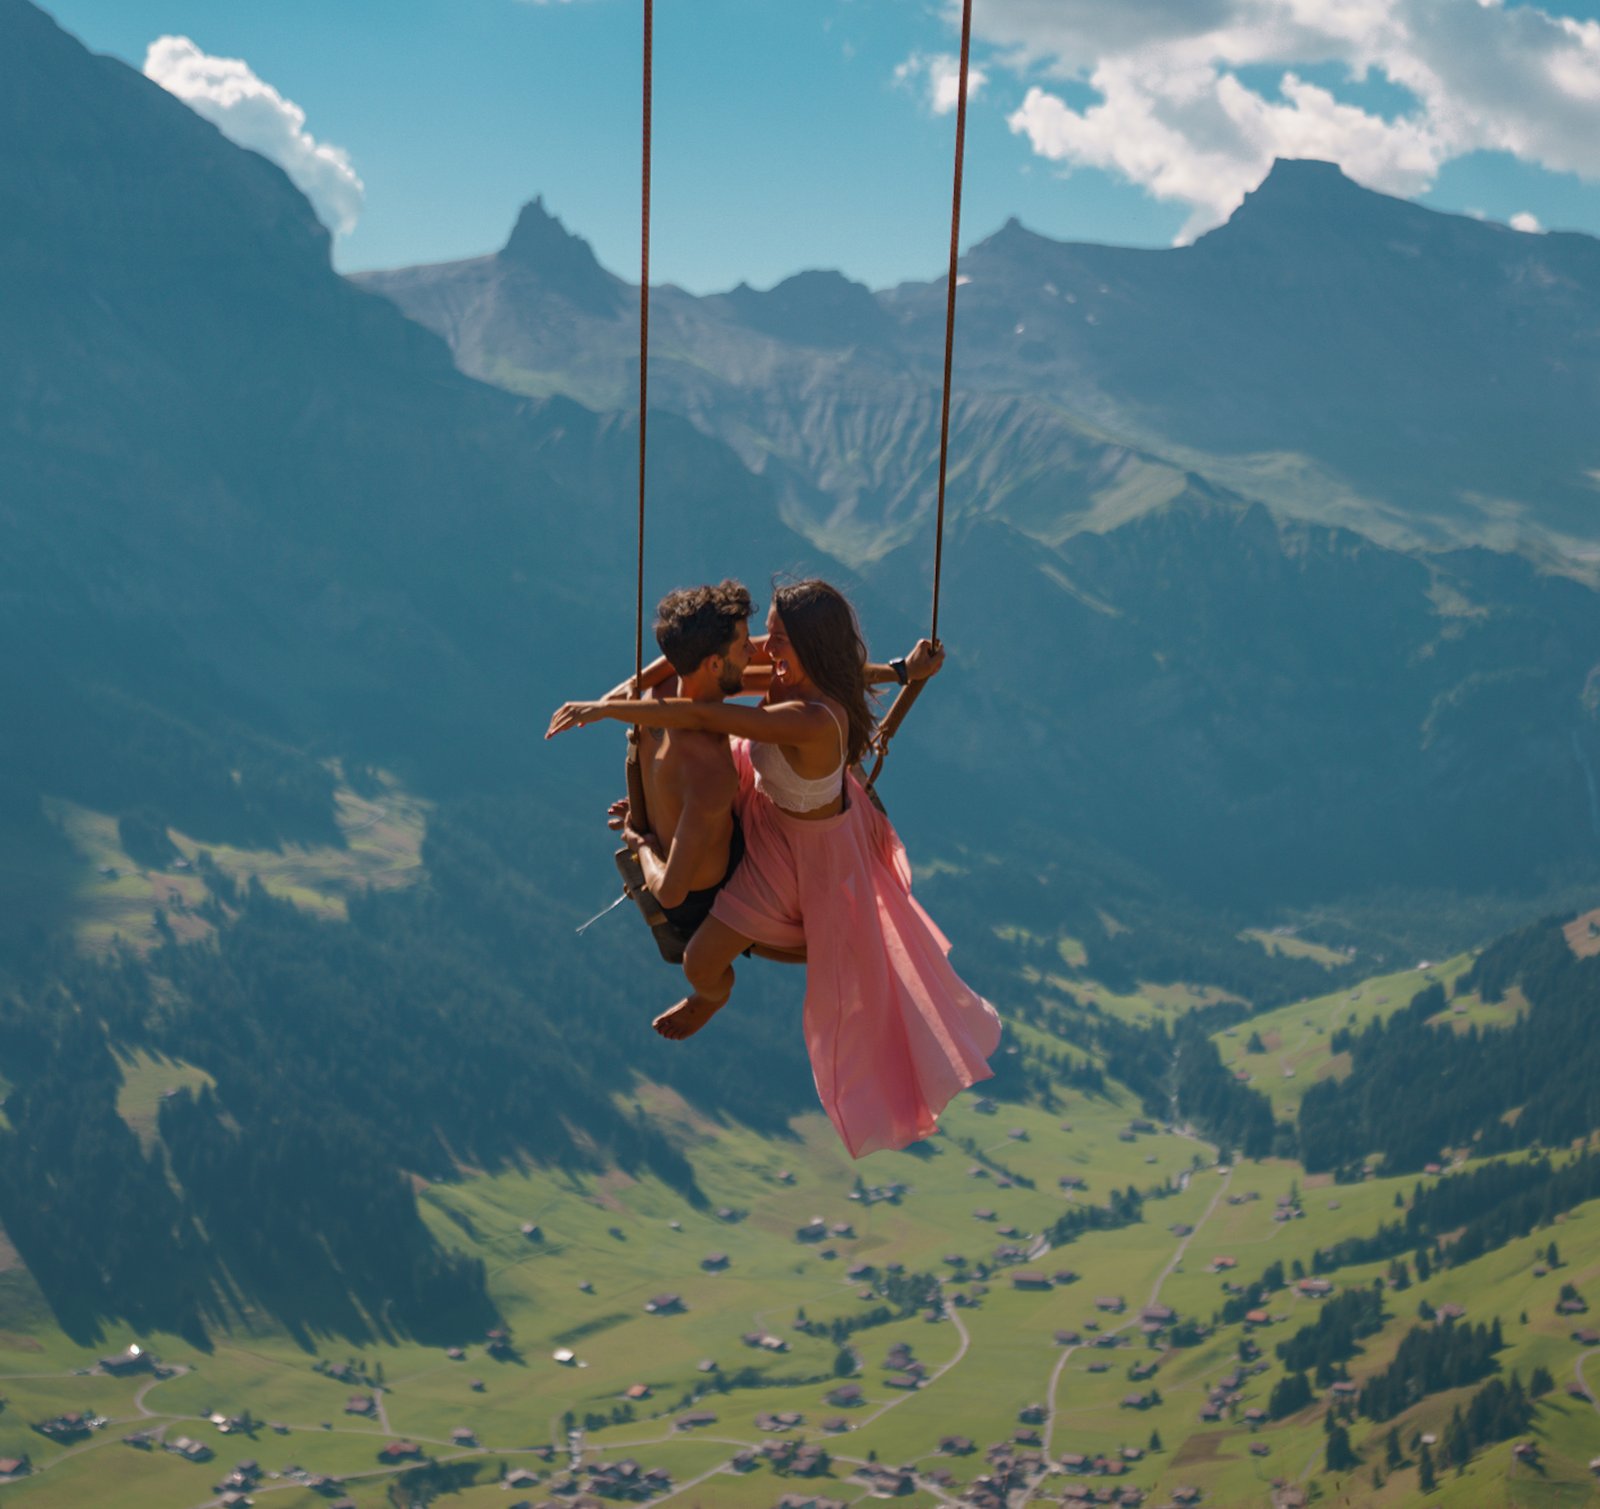 Giant Swing in Adelboden, good places to go in Switzerland